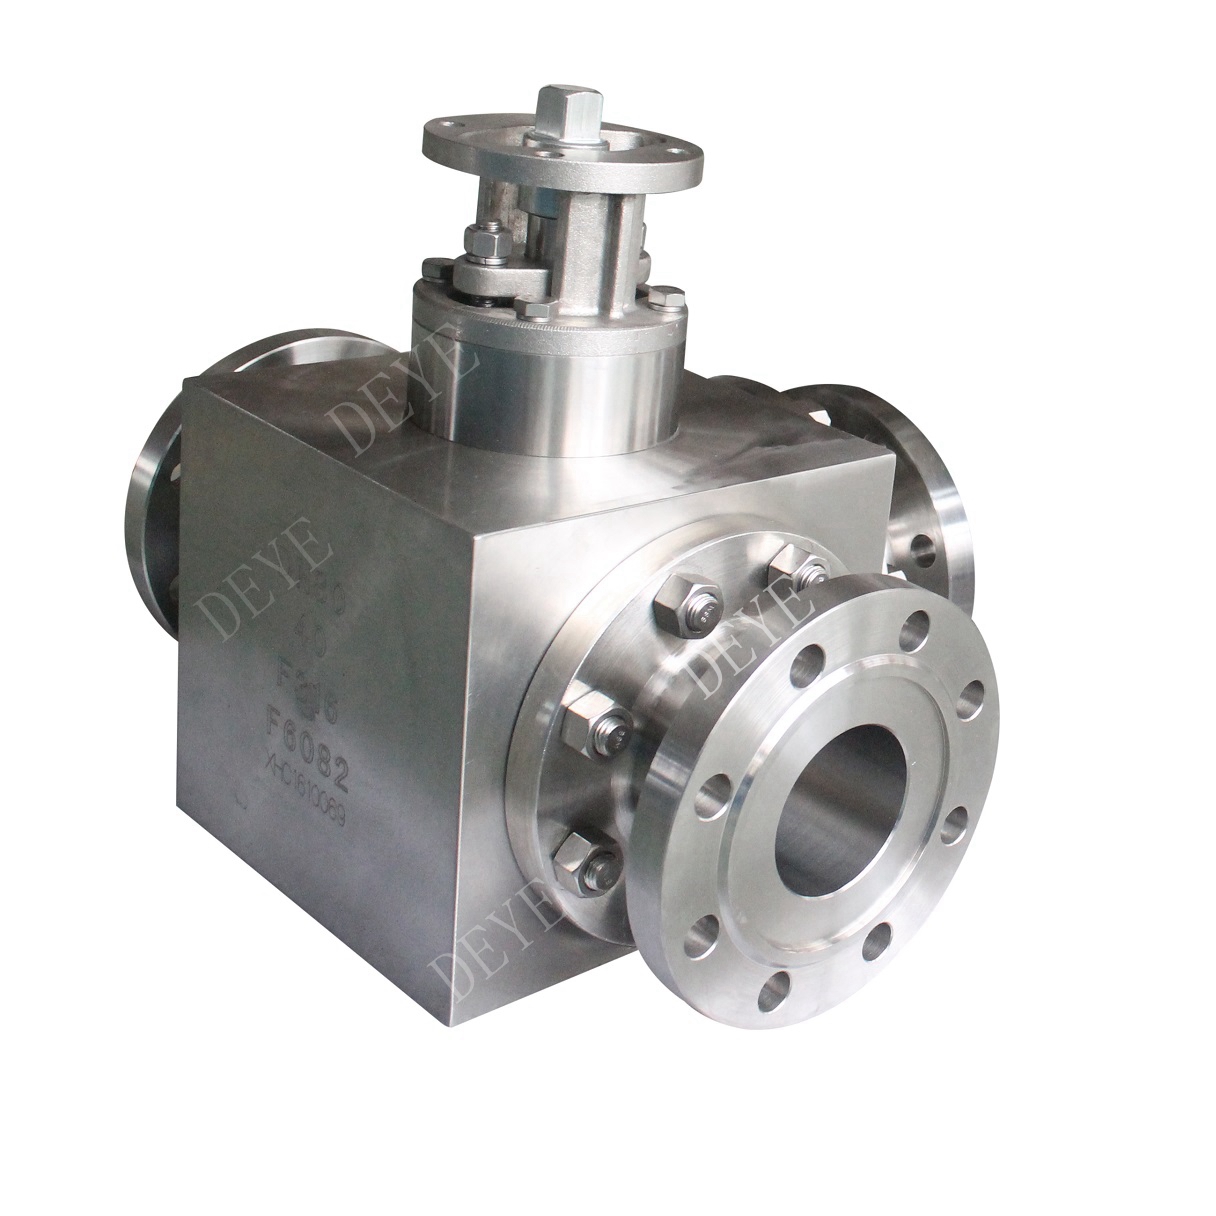 Factory Promotional 1000psi Ball Valve -
  300LBS stainless steel 3-way ball valve with Flanged ends  BV-300-3WYF – Deye